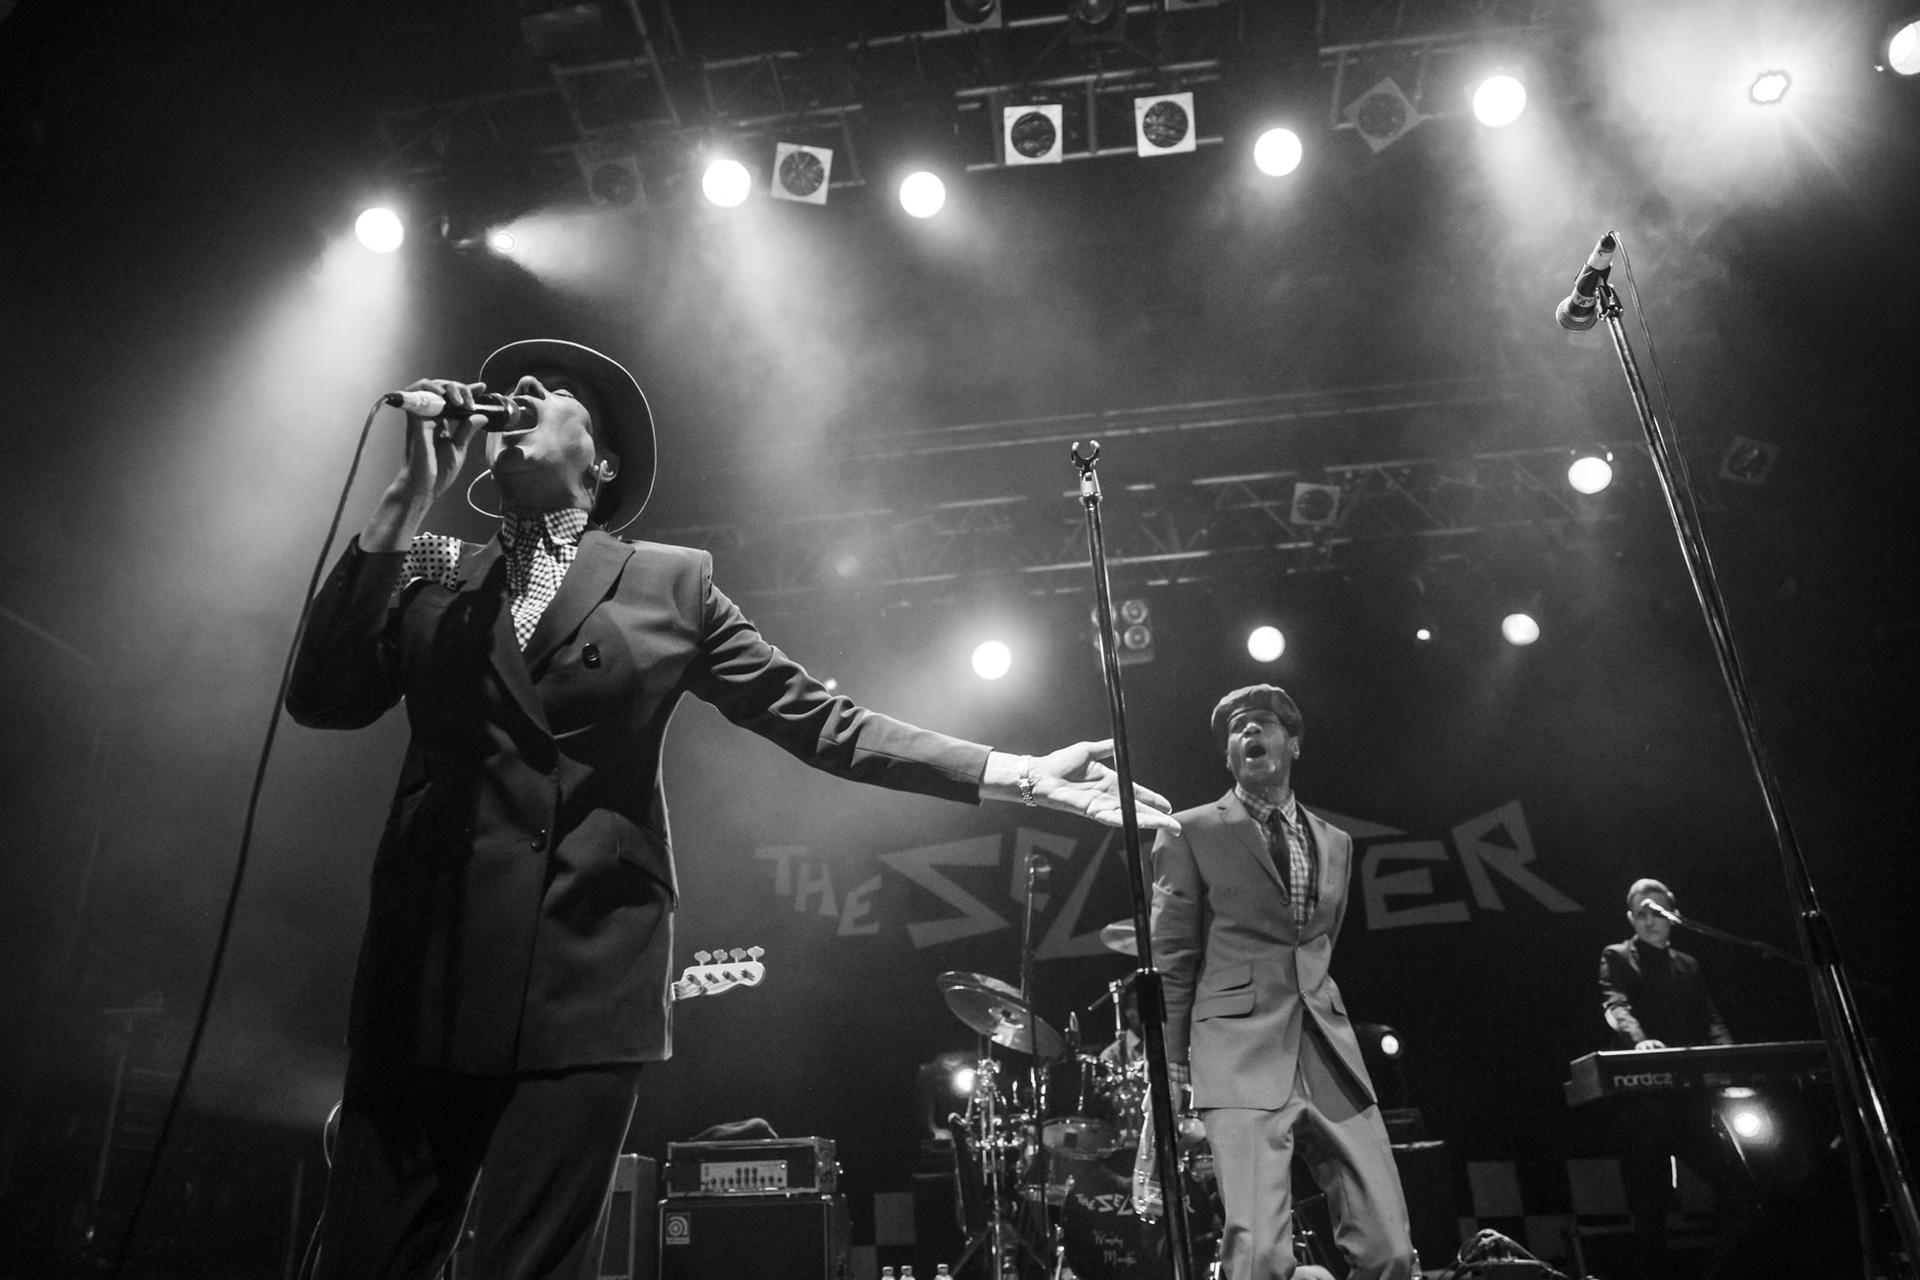 The Selecter on stage